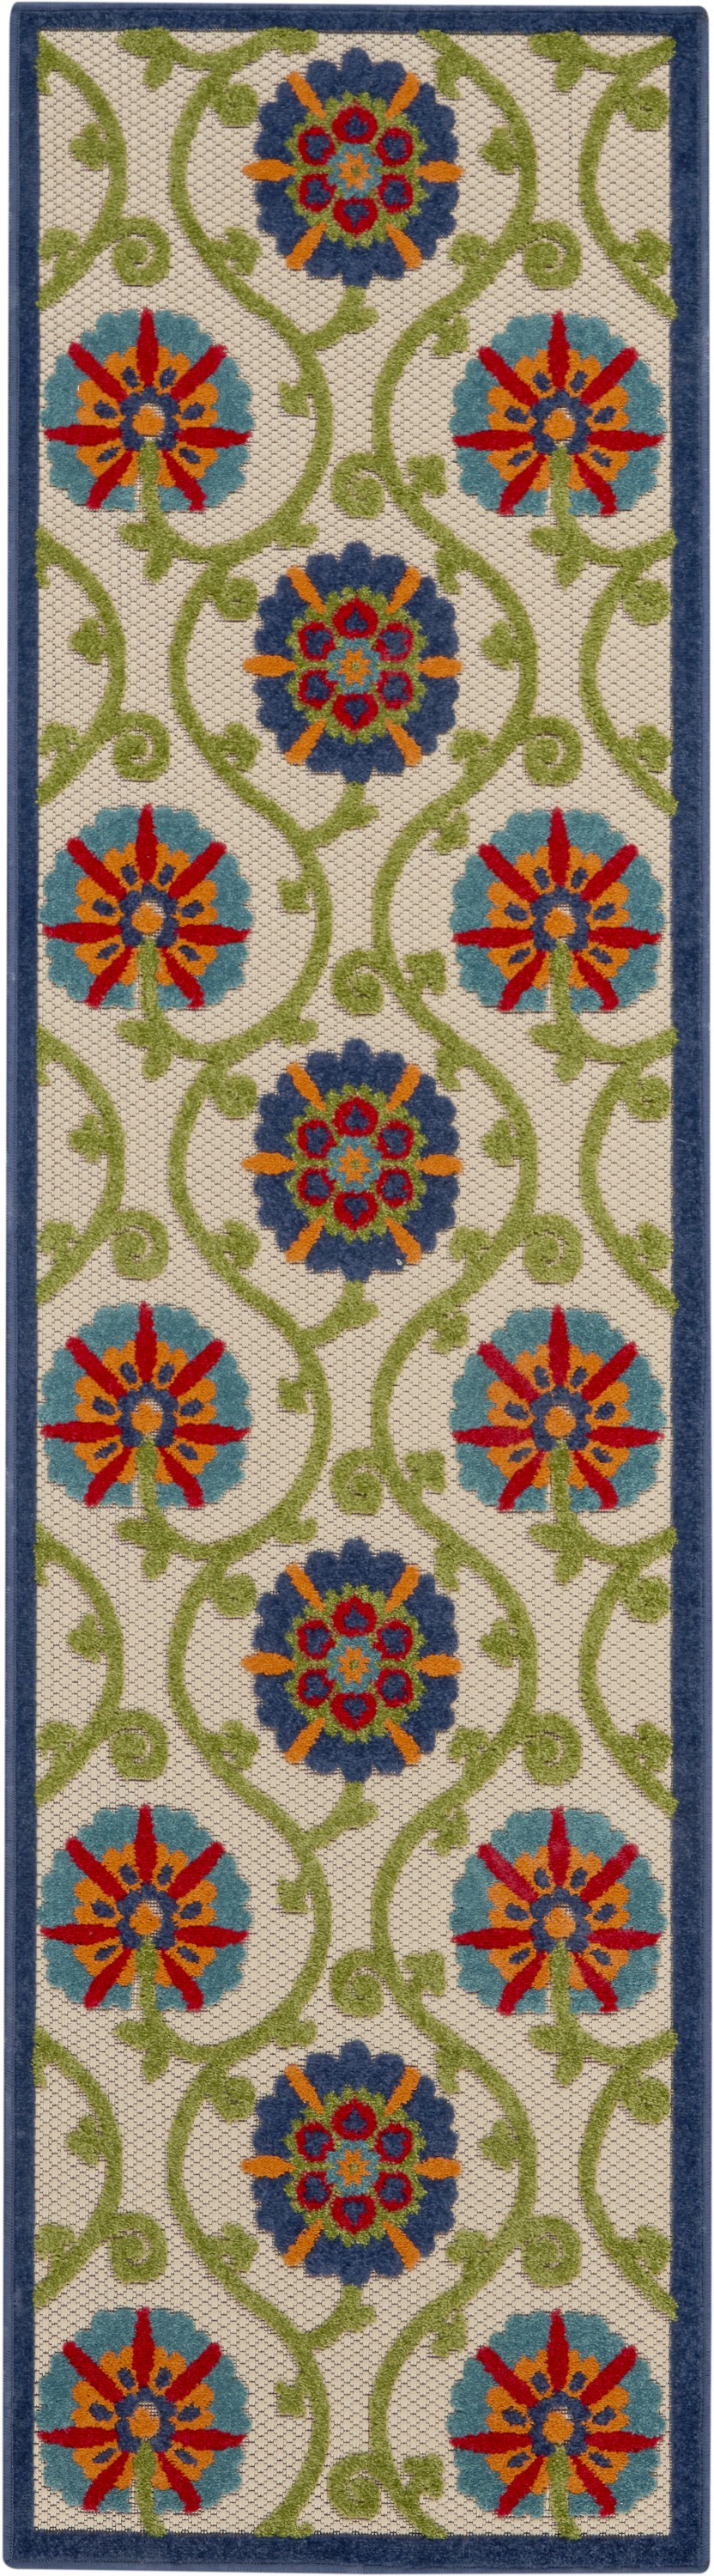 2' X 8' Ivory And Blue Floral Indoor Outdoor Area Rug-384968-1